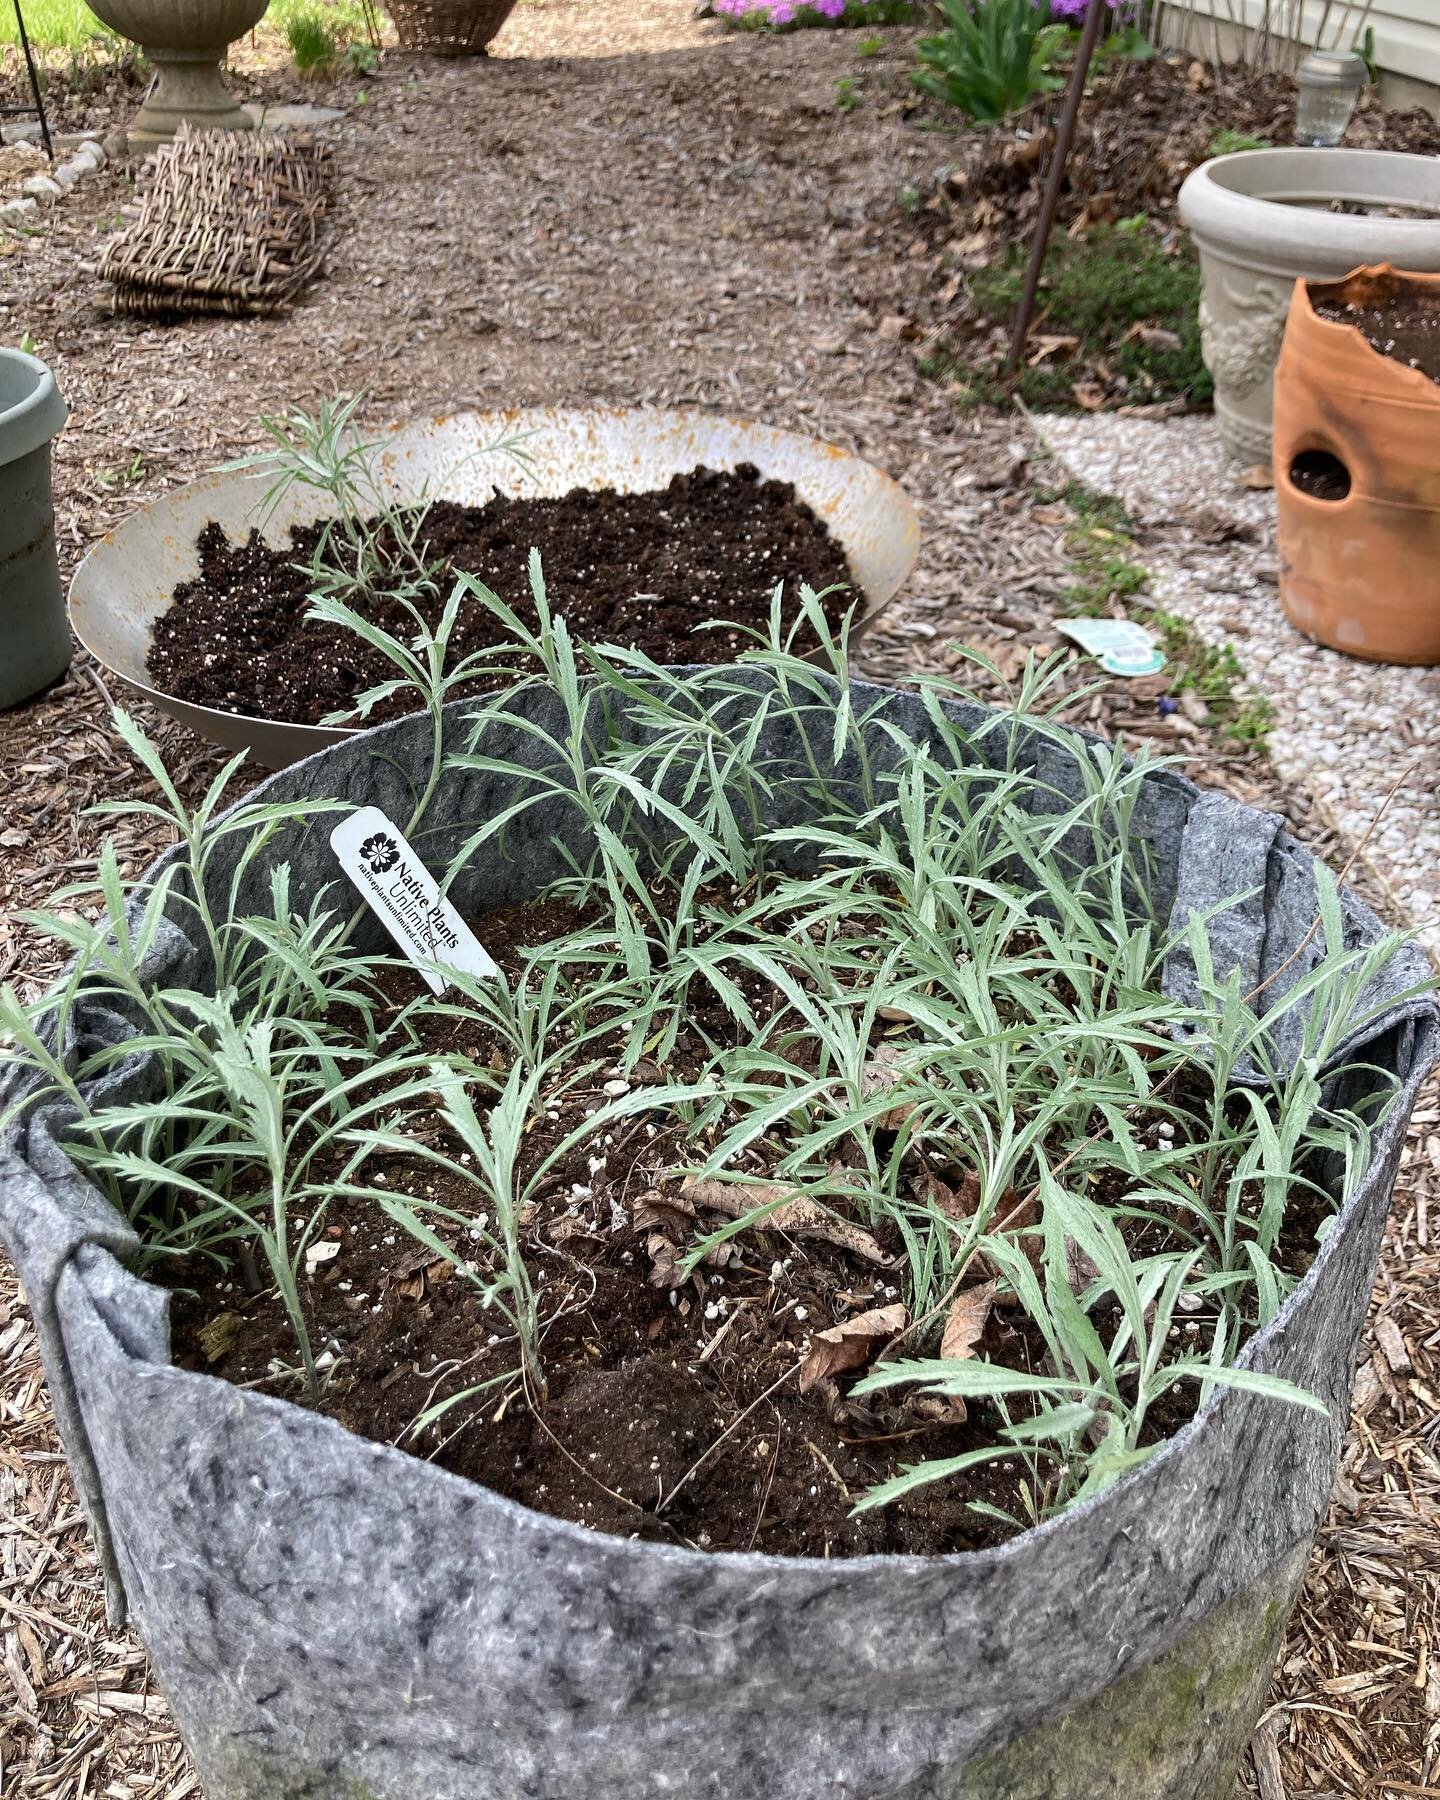 Another successful &ldquo;natives in containers&rdquo; experiment! White sage, Artemisia ludoviciana, from my friends @native_plants_unlimited, successfully lived all last summer and through the winter, flourishing in grow bags from my friend @cultuv